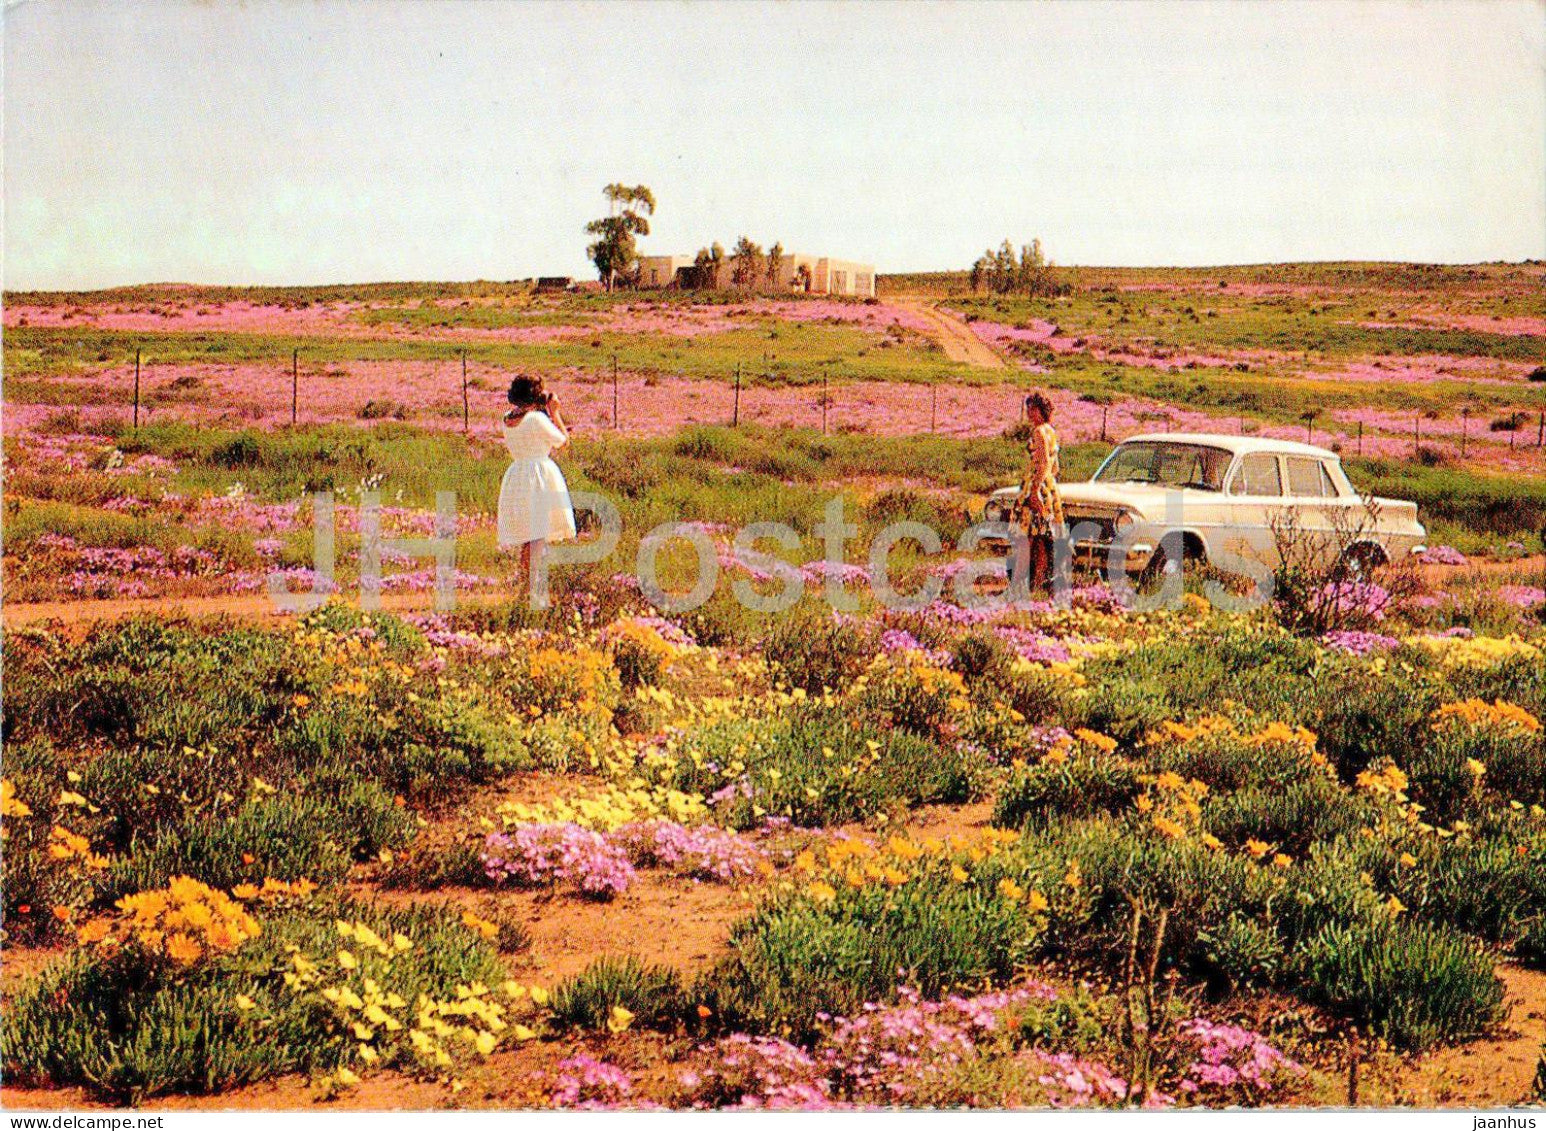 Wild flower time - Namaqualand - car - South Africa - unused - JH Postcards